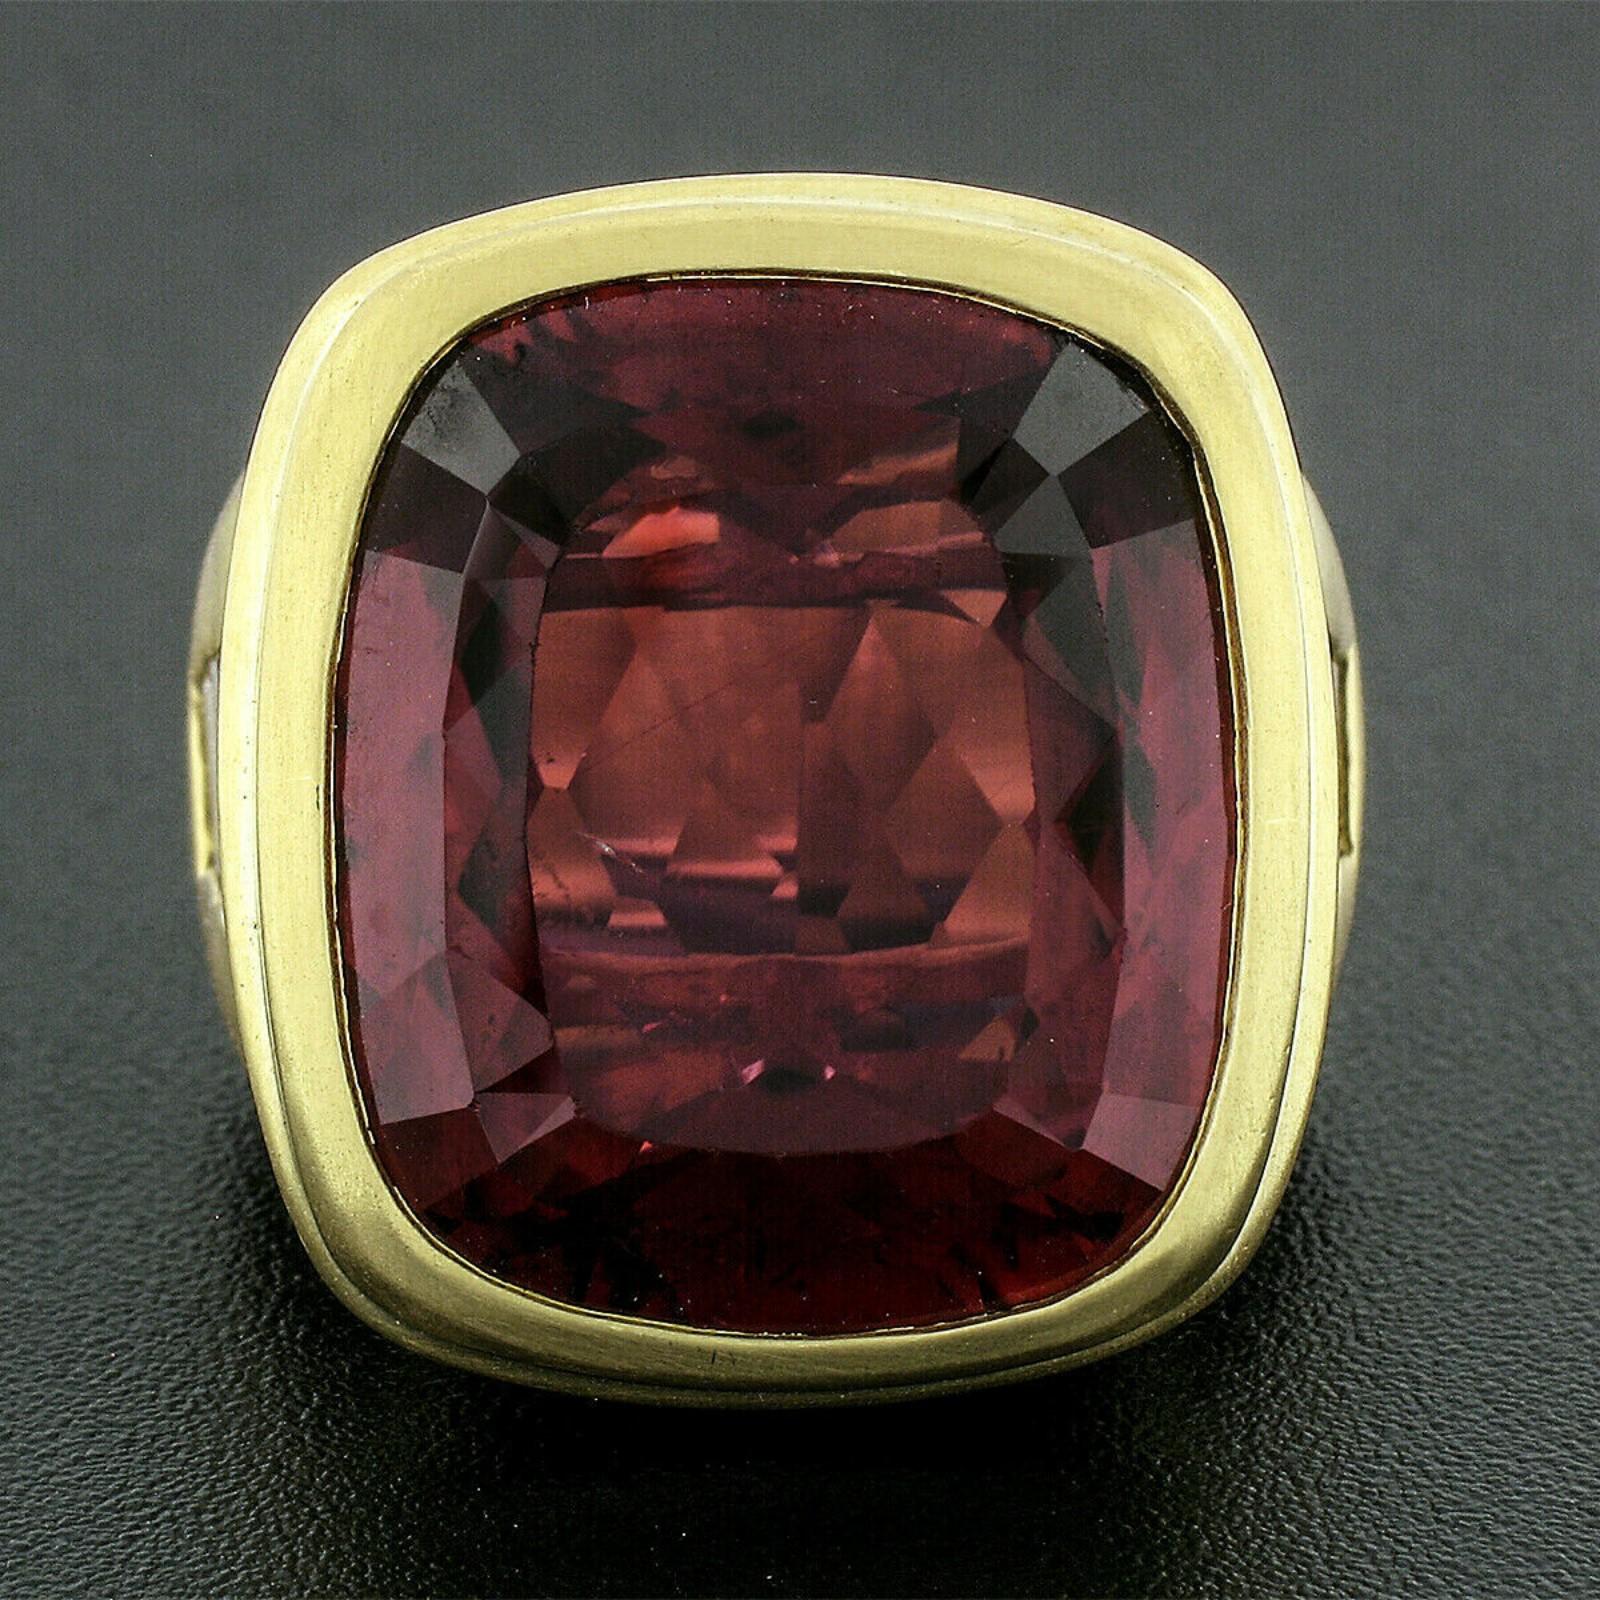 Here we have a magnificent statement ring crafted in solid 18k greenish yellow gold and designed by Kieselsein Cord. The ring features a large and breathtakingly rubellite solitaire, perfectly bezel set at its center. The gorgeous tourmaline weighs